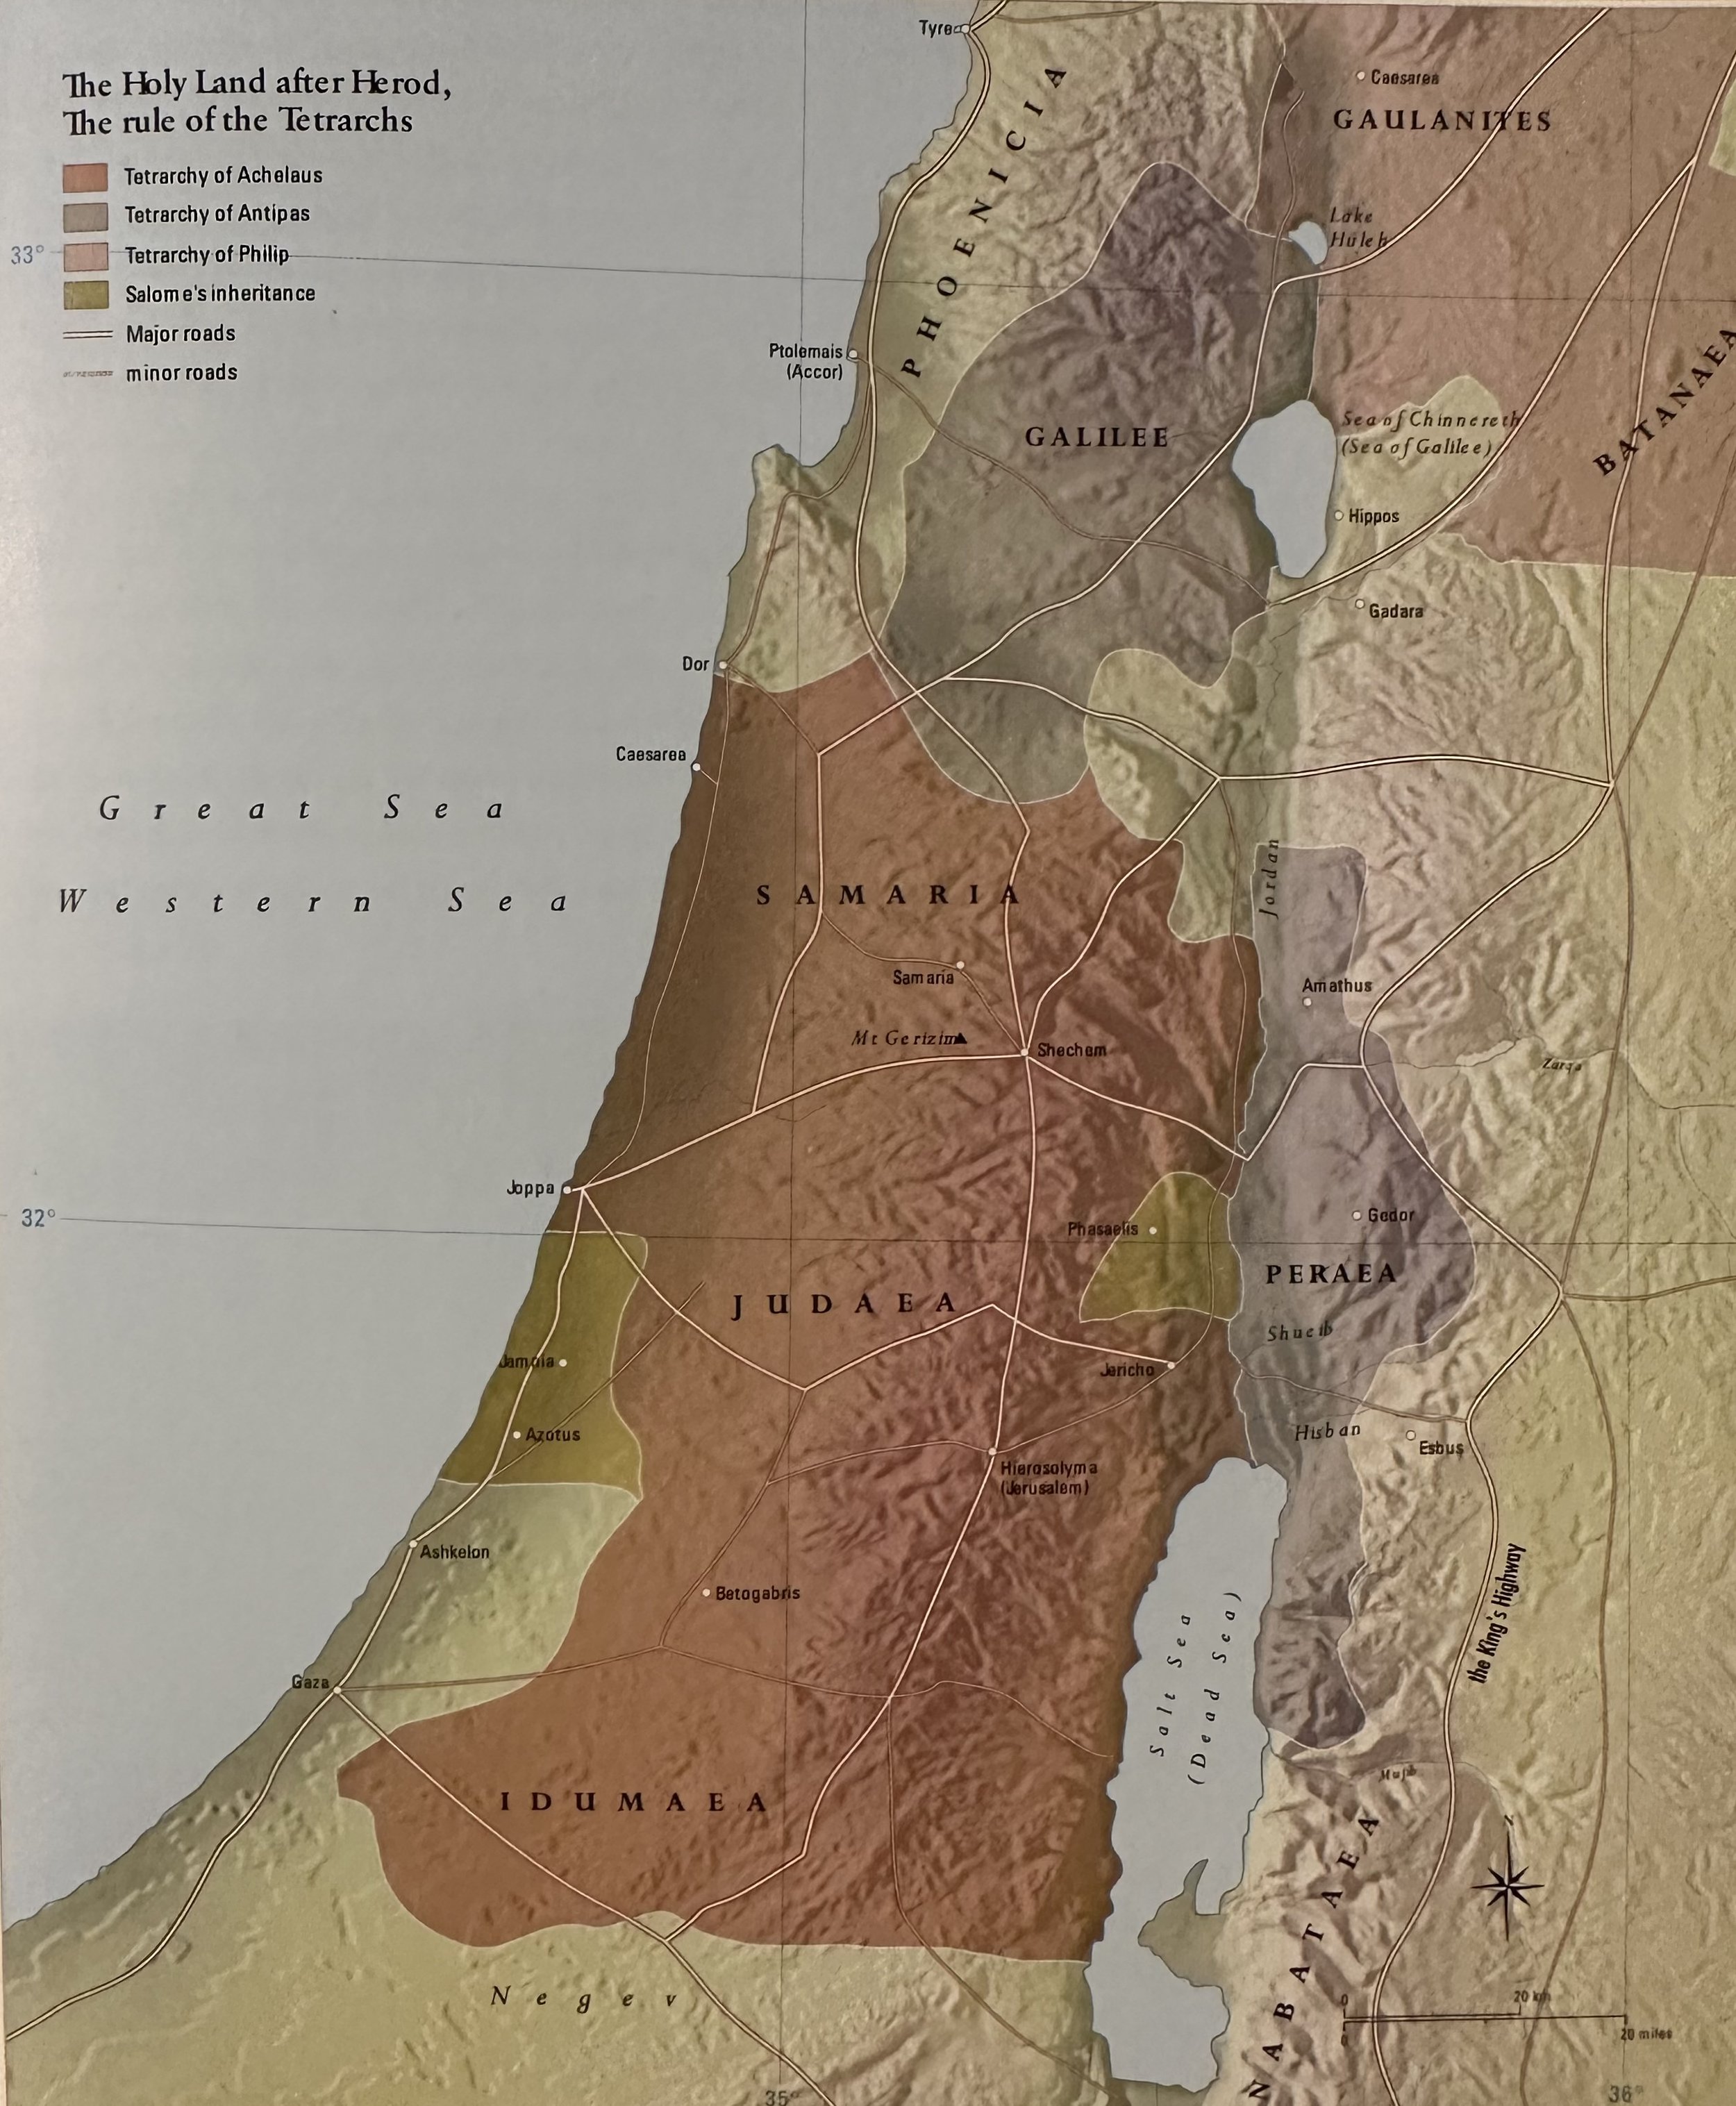 ~4 BCE The Holy Land after Herod- the Rule of the Tetrarchs Atlas of the Bible.jpeg